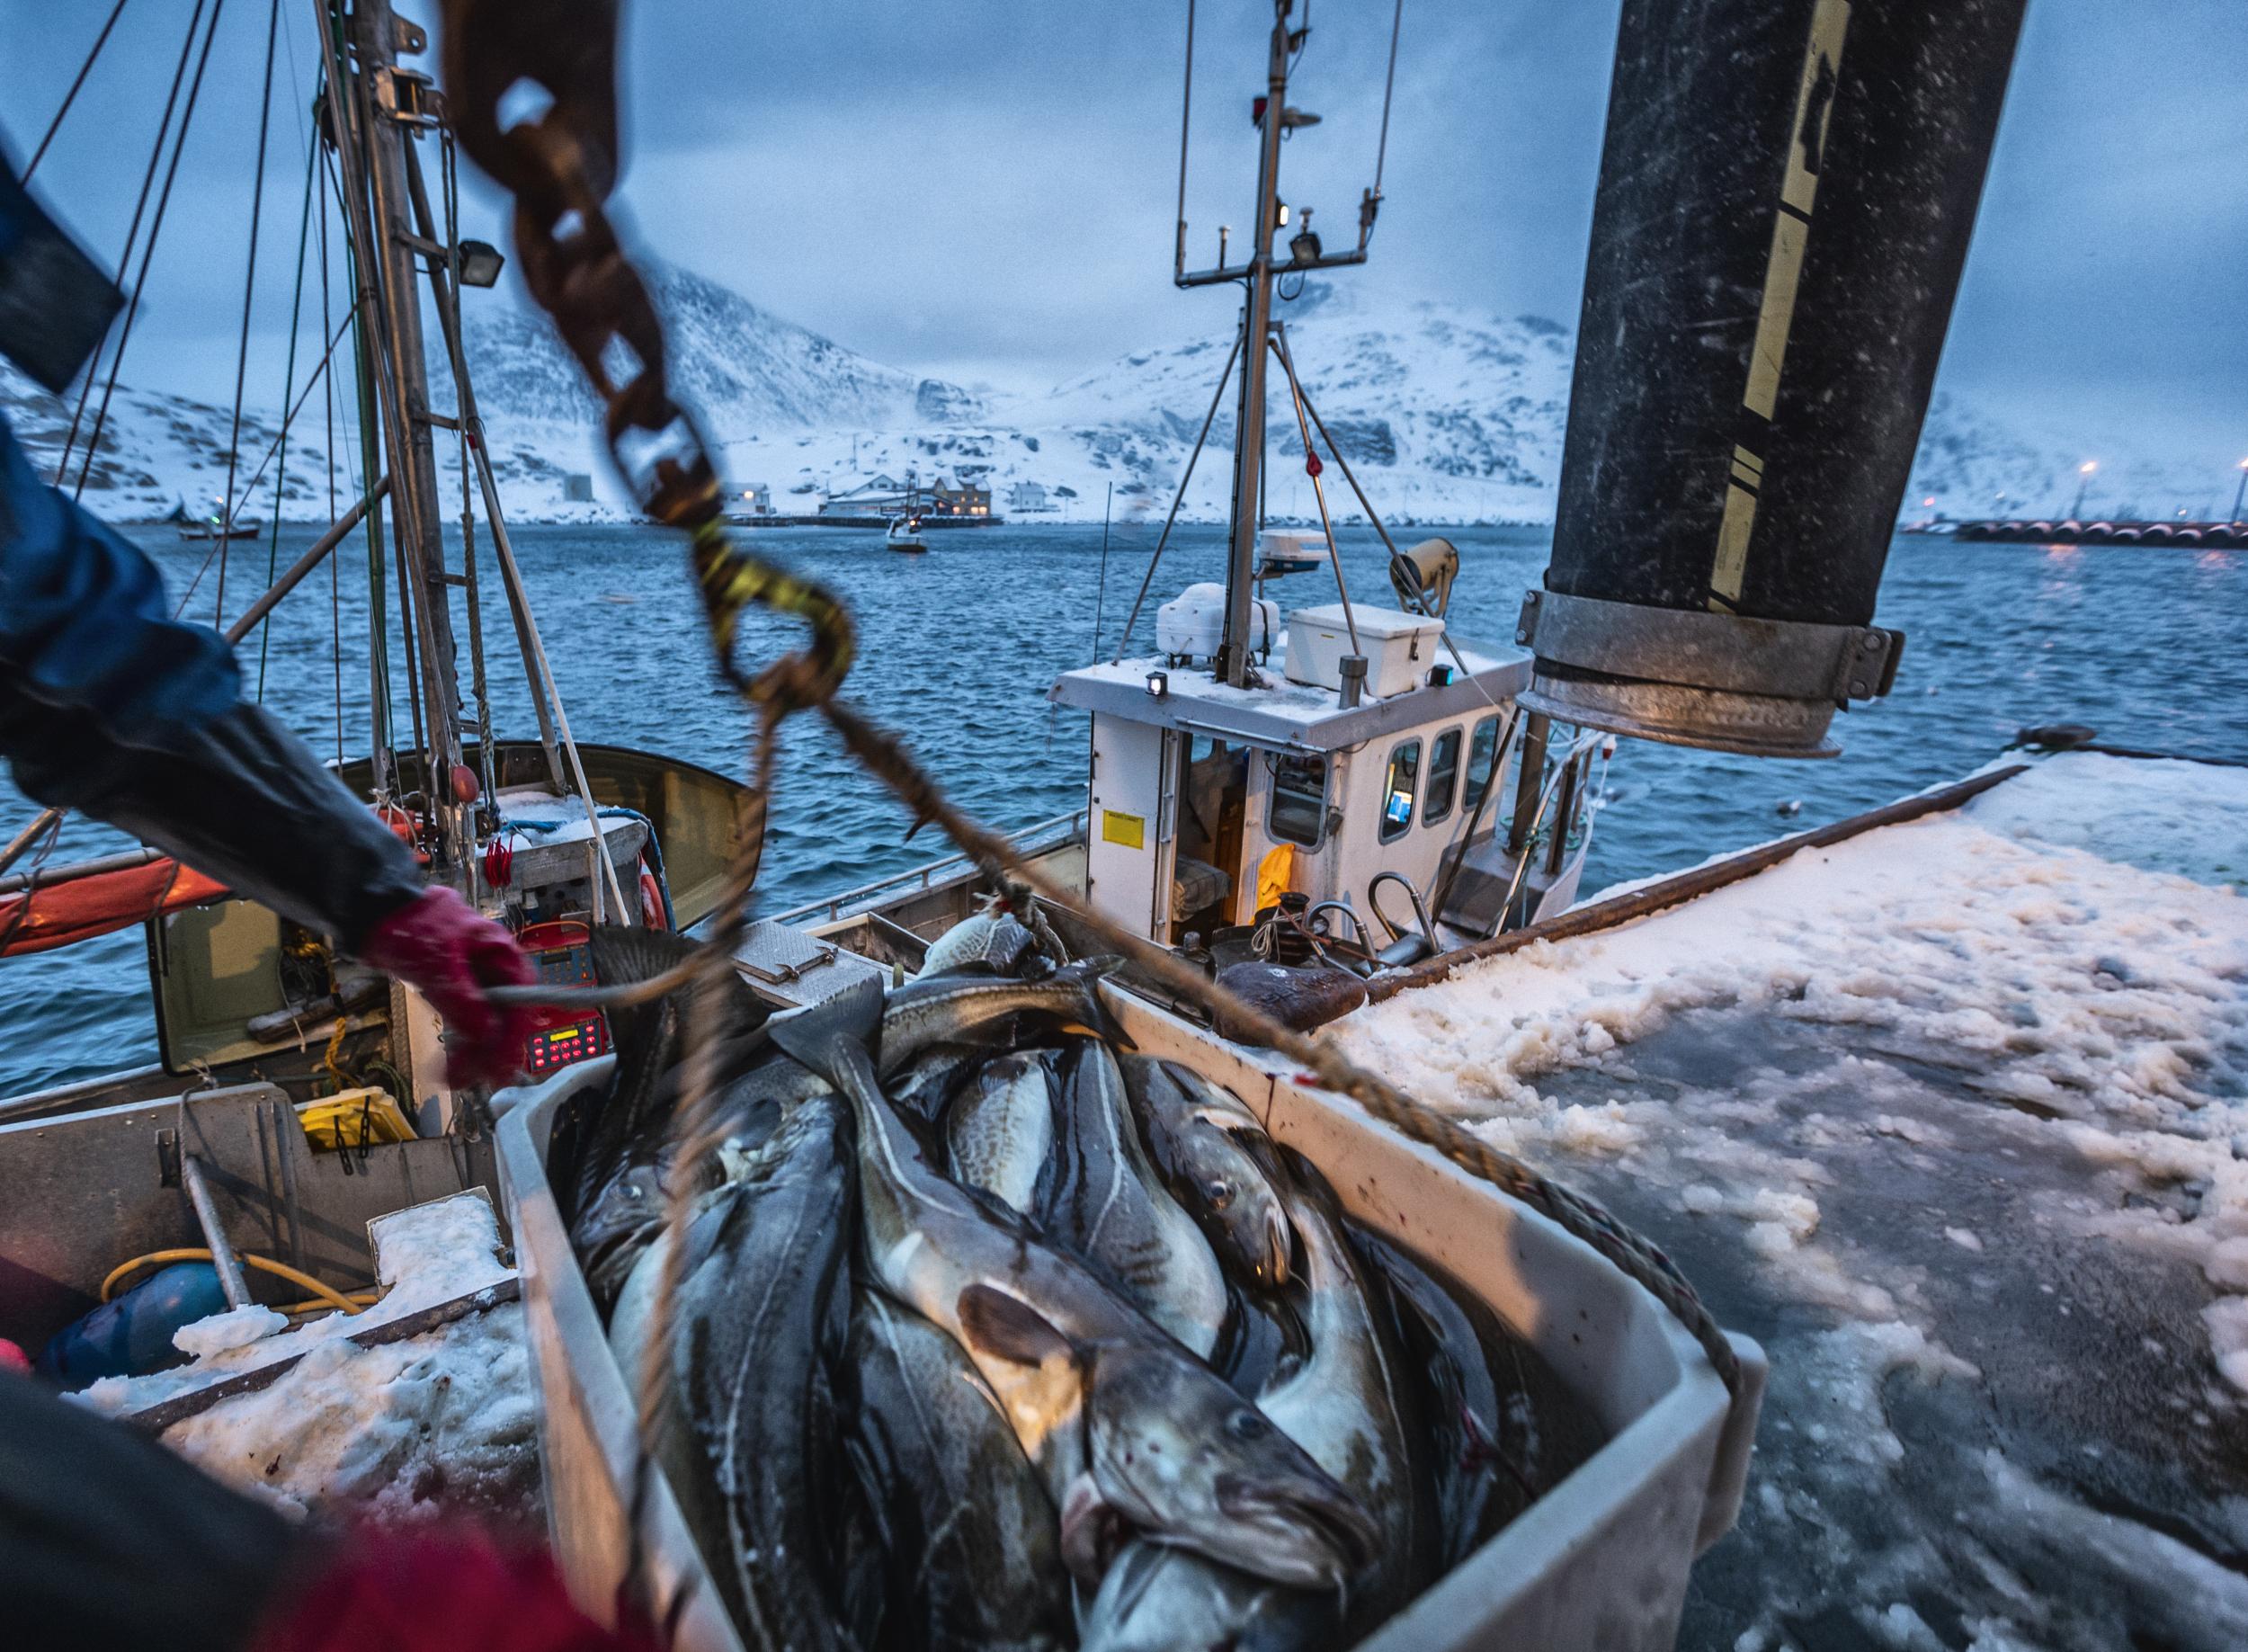 Protecting polar marine habitats is extremely difficult because we know very little about them. Pictured is fisherman catching cod in Arctic waters